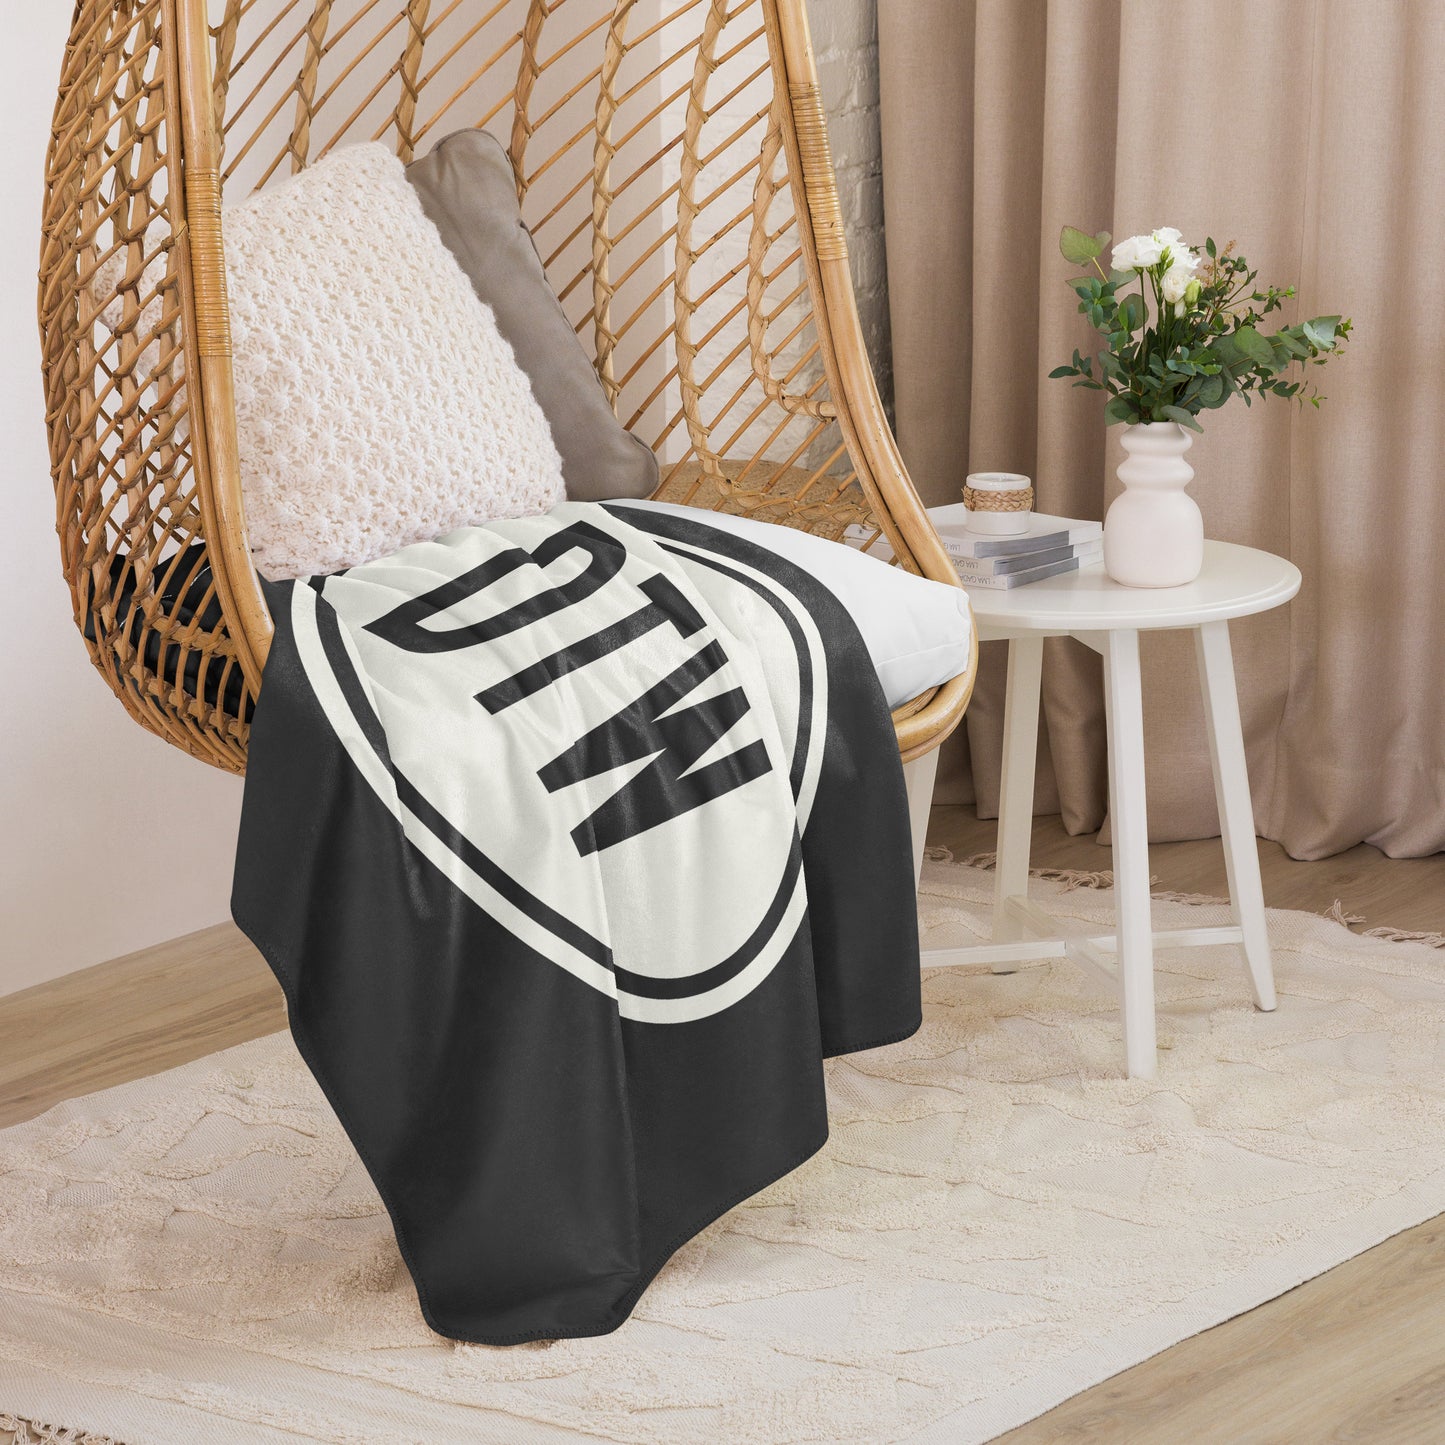 Unique Travel Gift Sherpa Blanket - White Oval • DTW Detroit • YHM Designs - Image 06